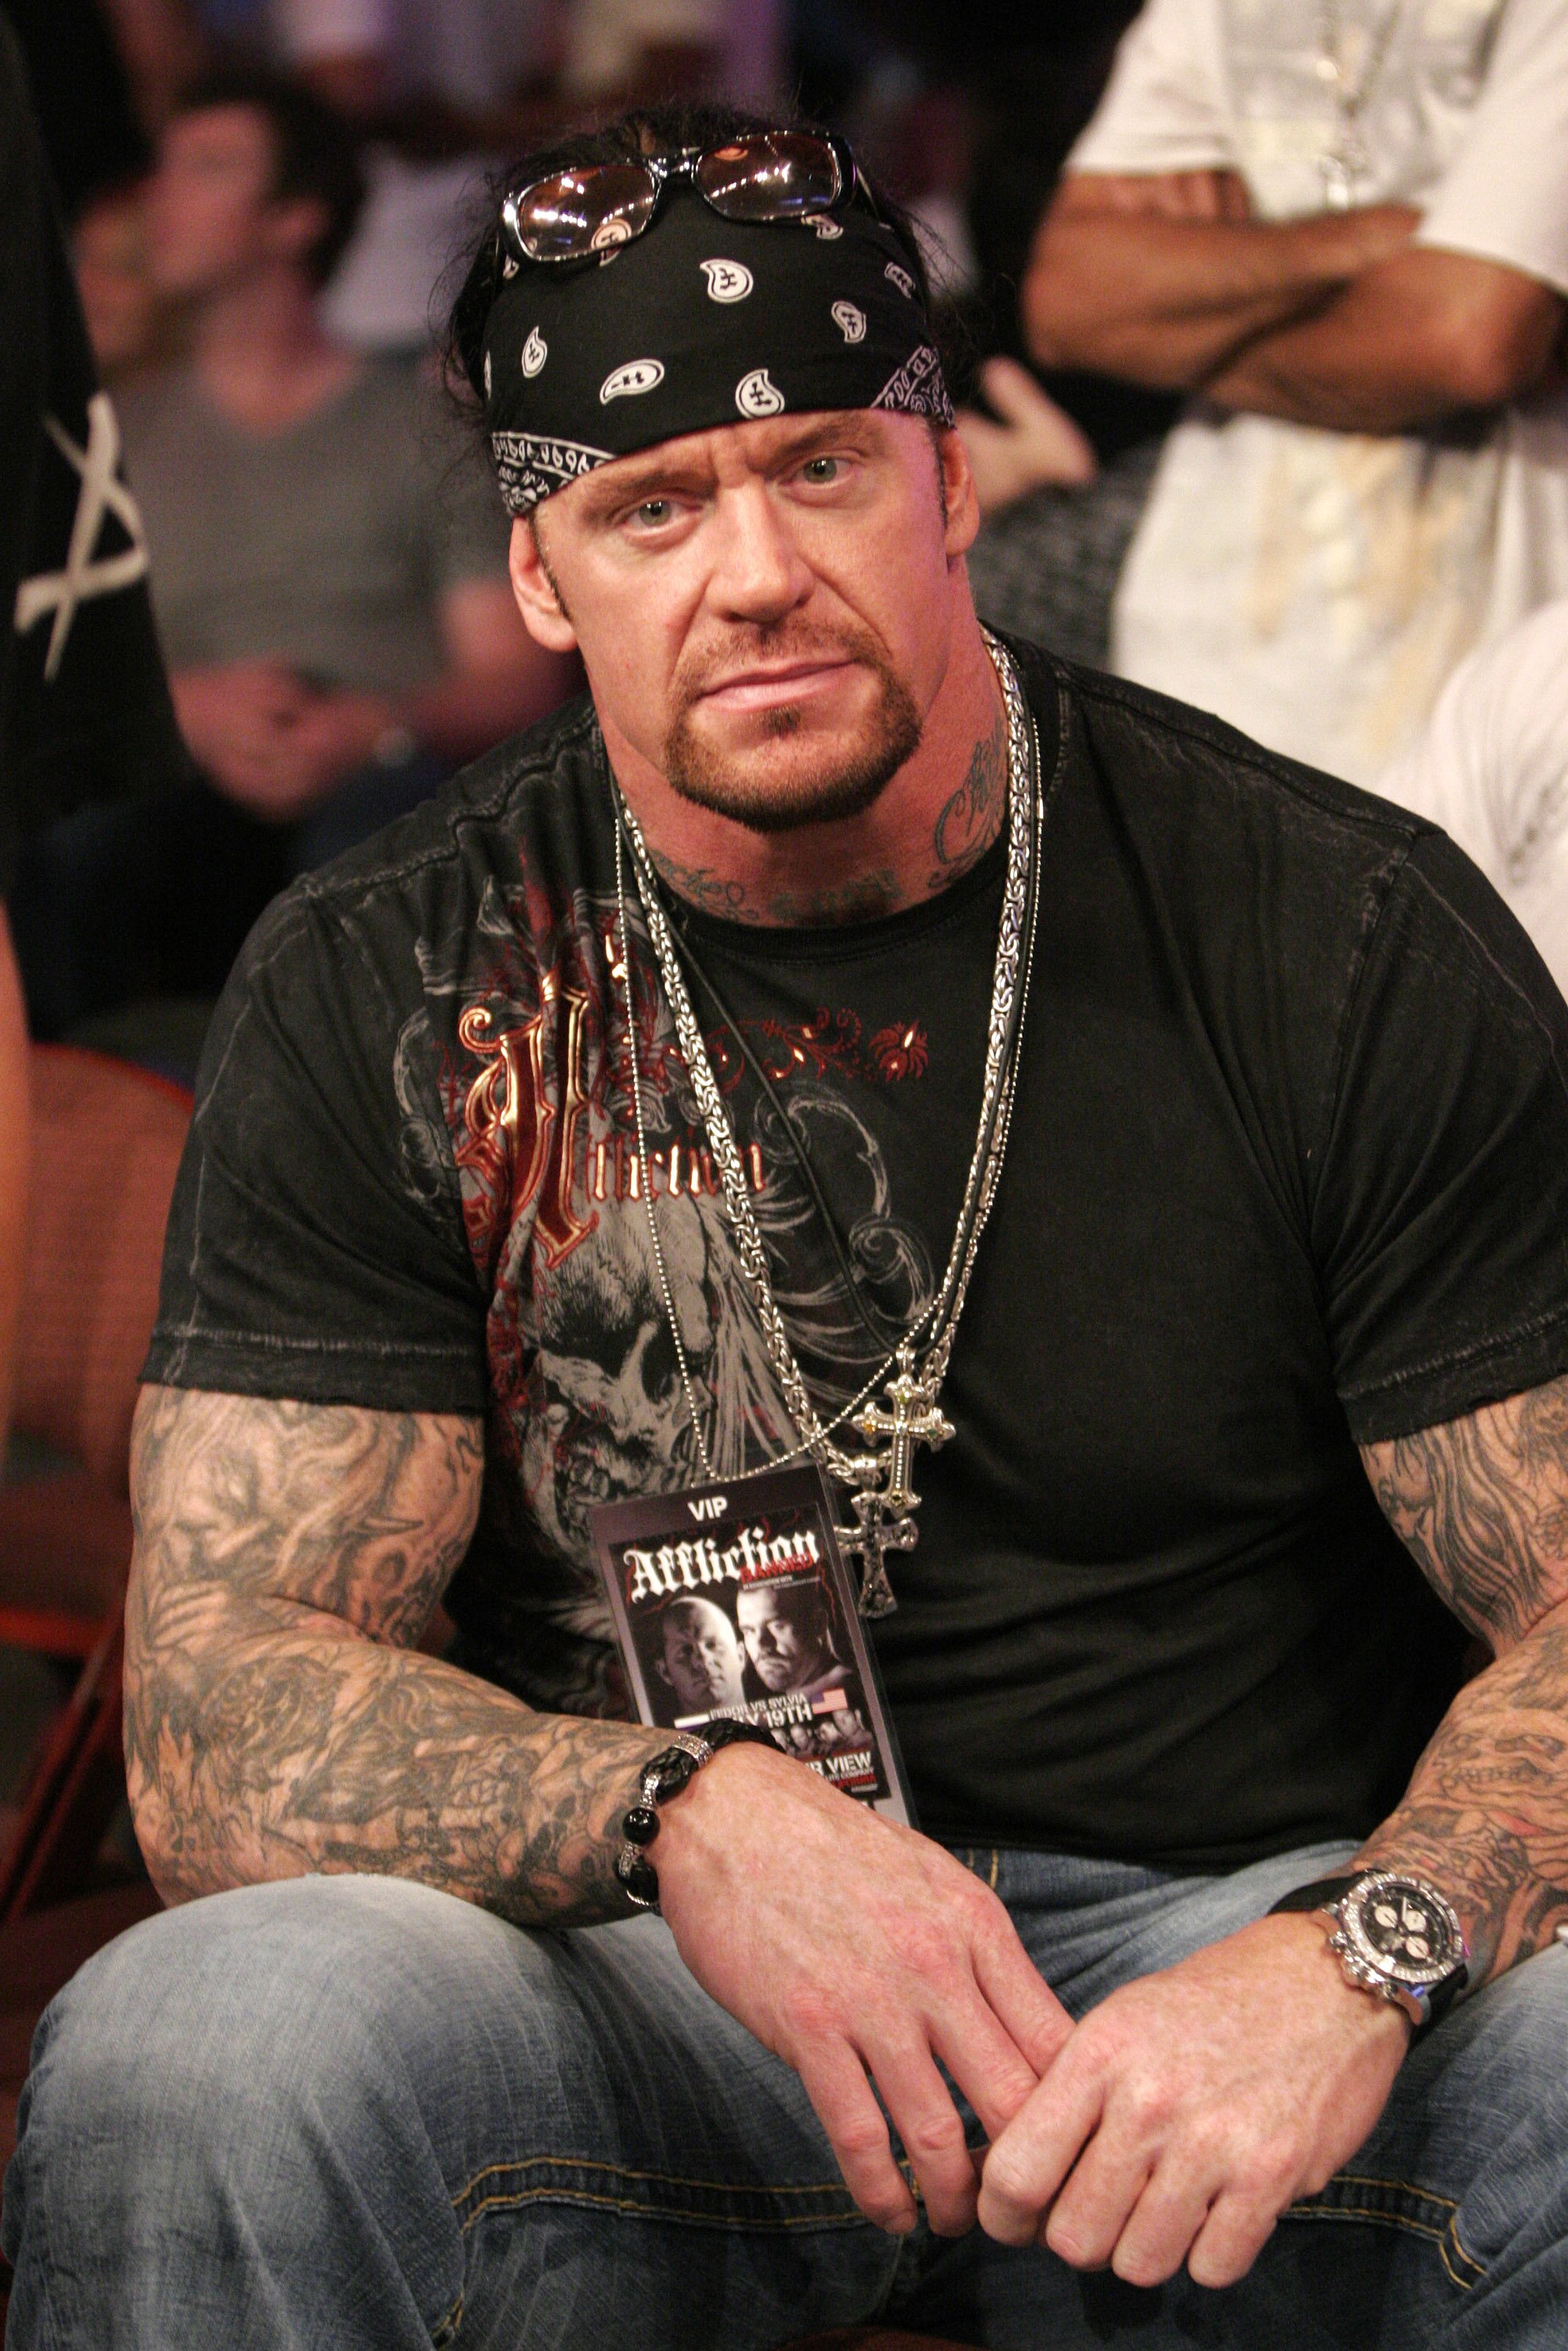 The Undertaker at the Affliction Banned event on July 19, 2008, in California | Source: Getty Images